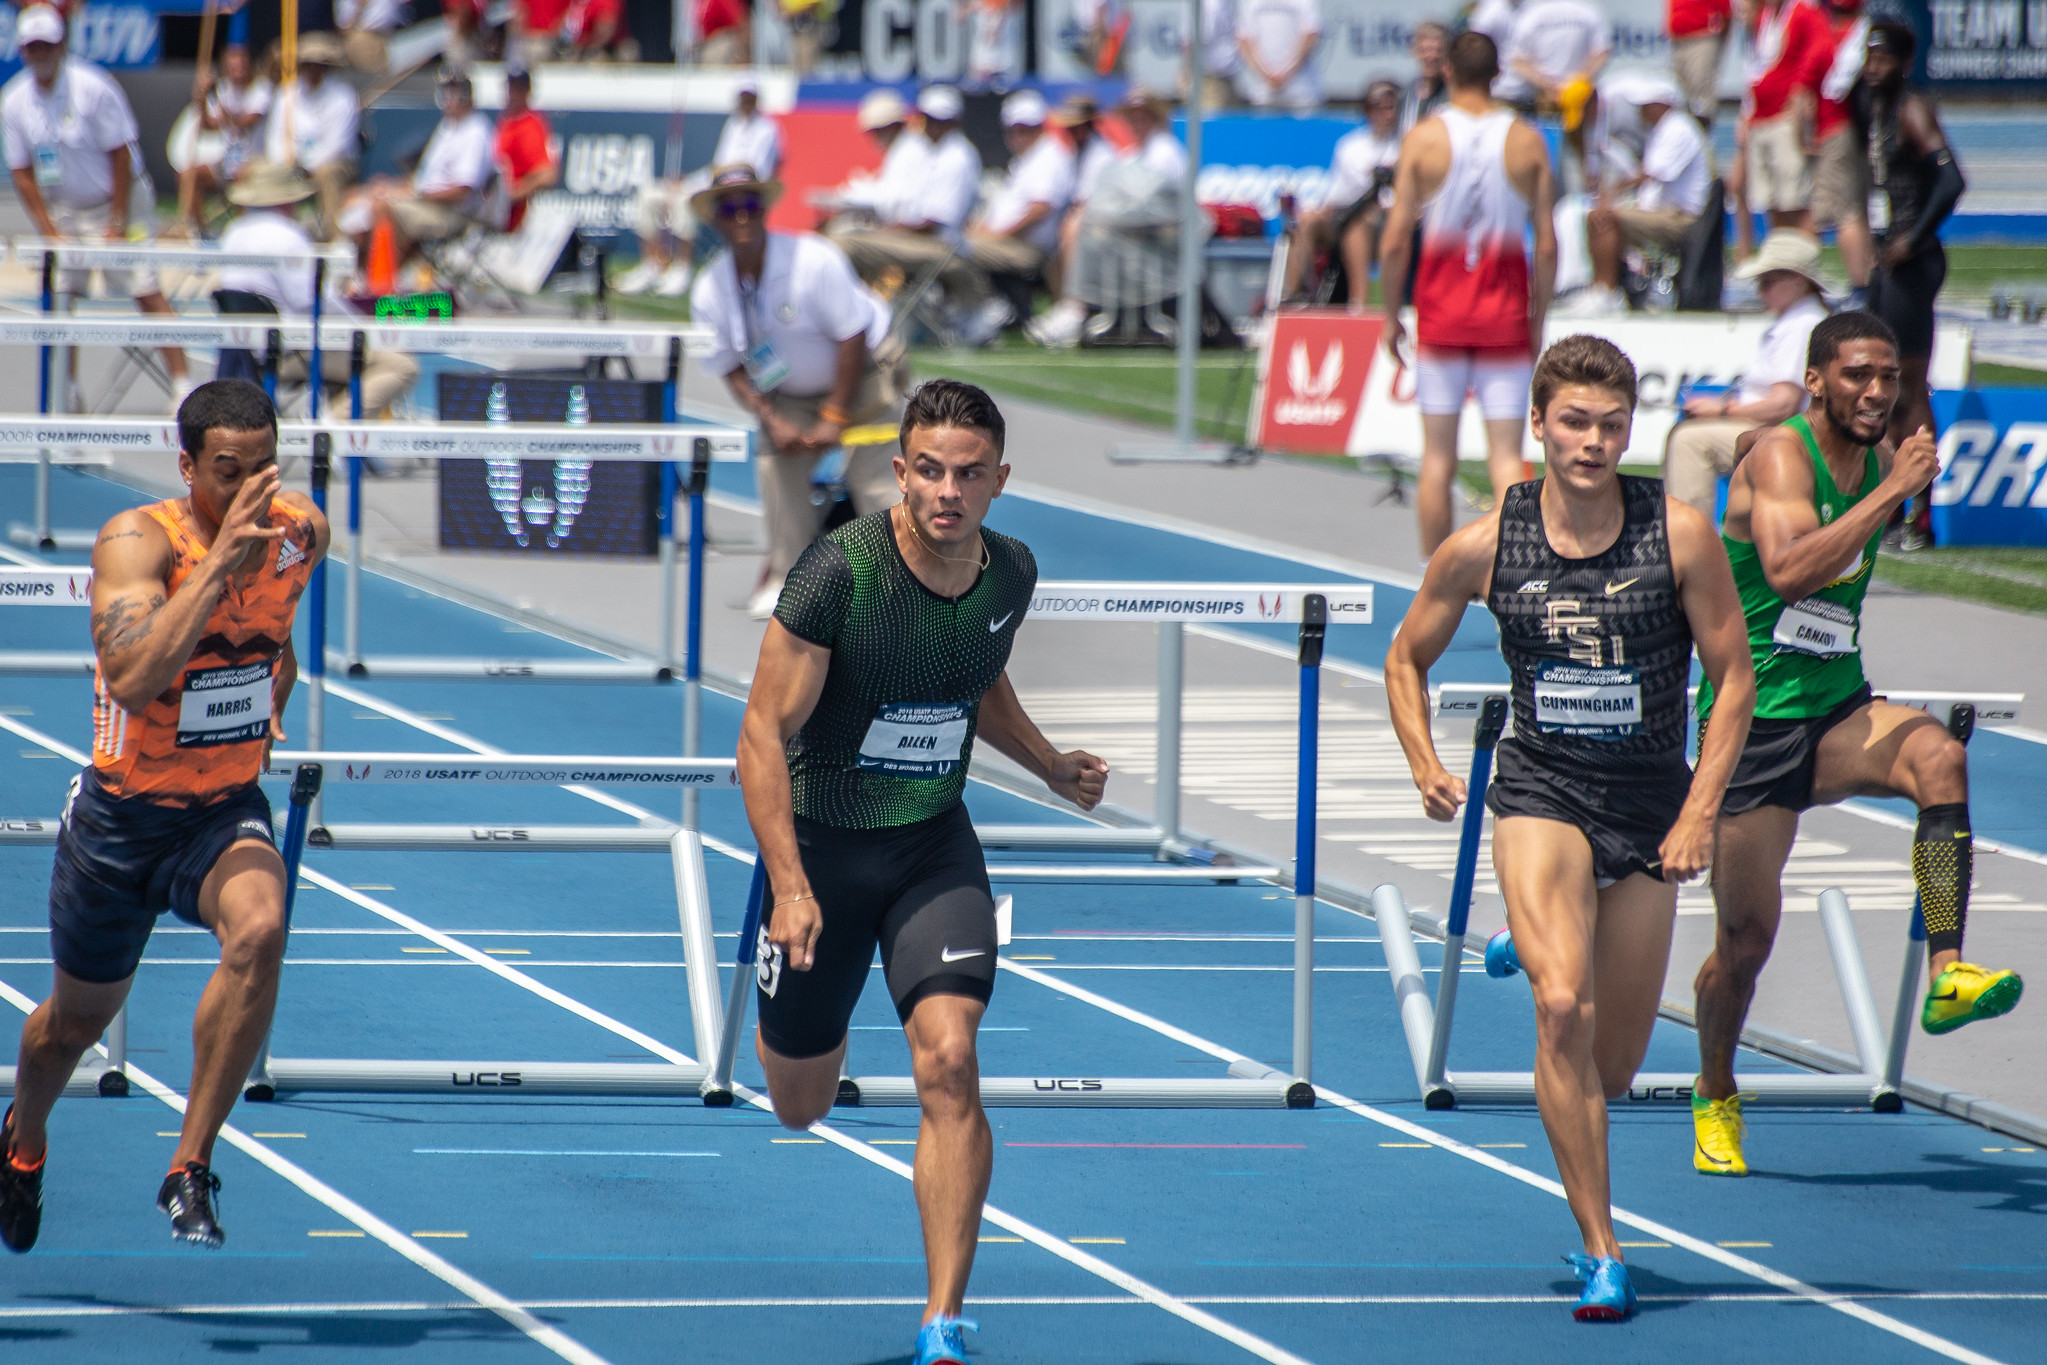 Devon Allen's reaction times: Track & field's rules and tech need to keep up/